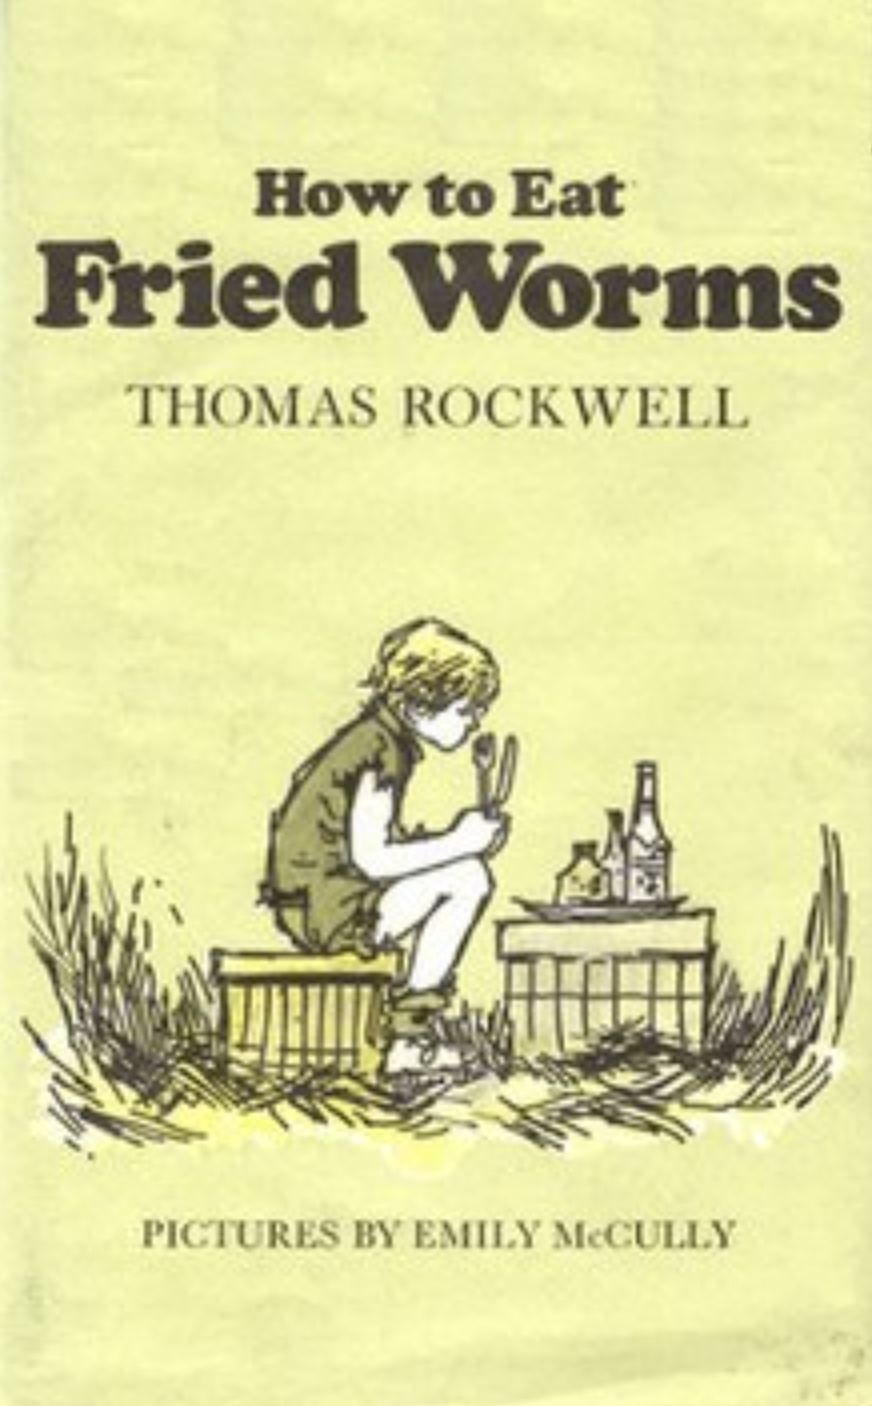 &quot;How to Eat Fried Worms&quot;